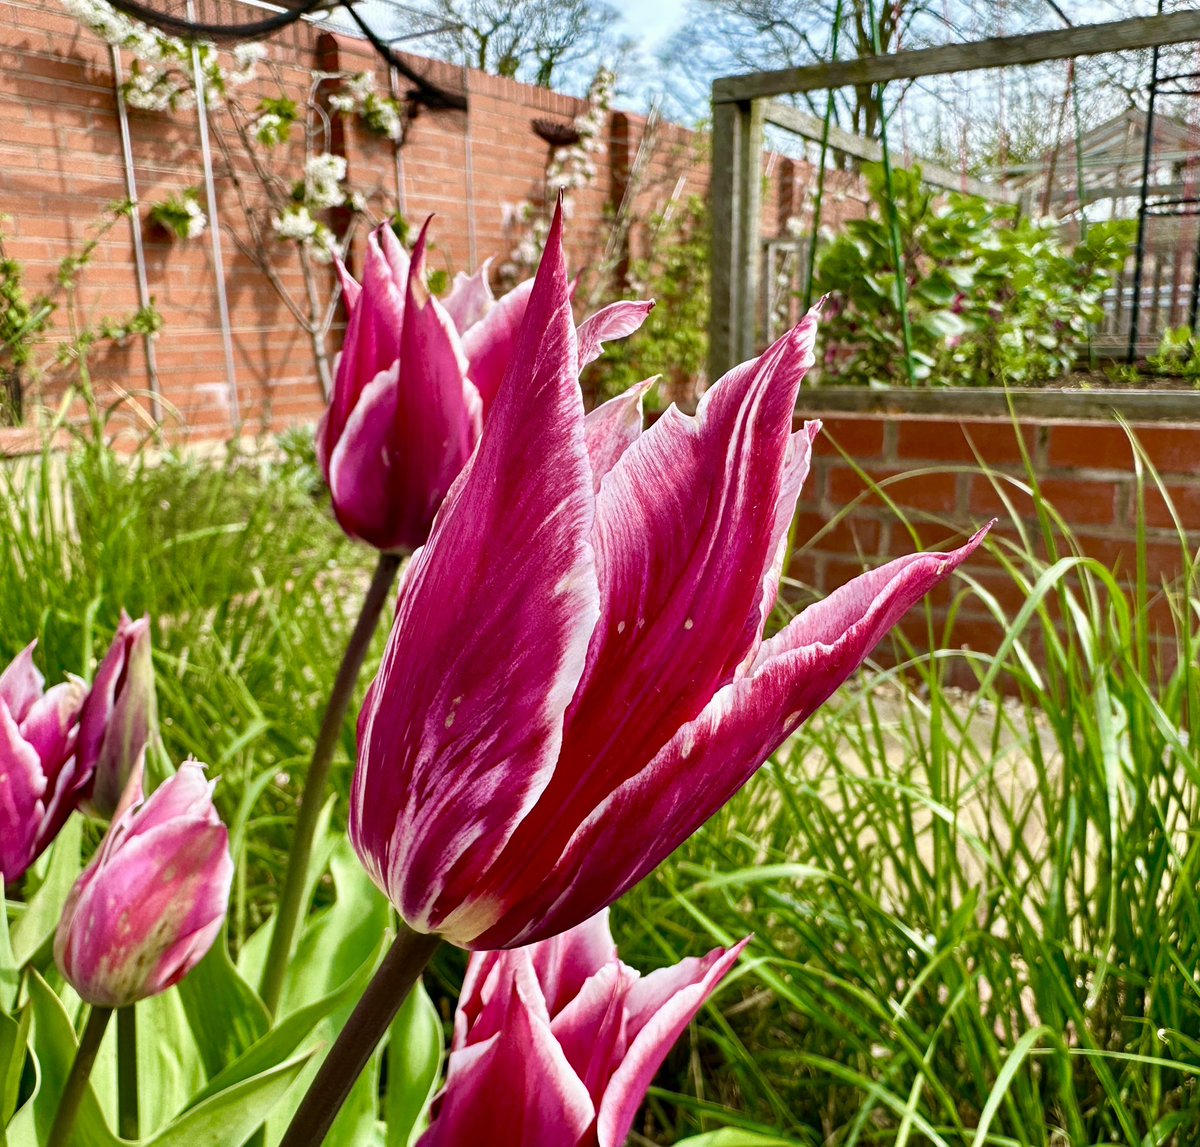 Tulip ‘Claudia’ for today’s #TulipTuesday with #cherryblossom & #appleblossom in the background 

#AprilFlowers #GardeningTwitter